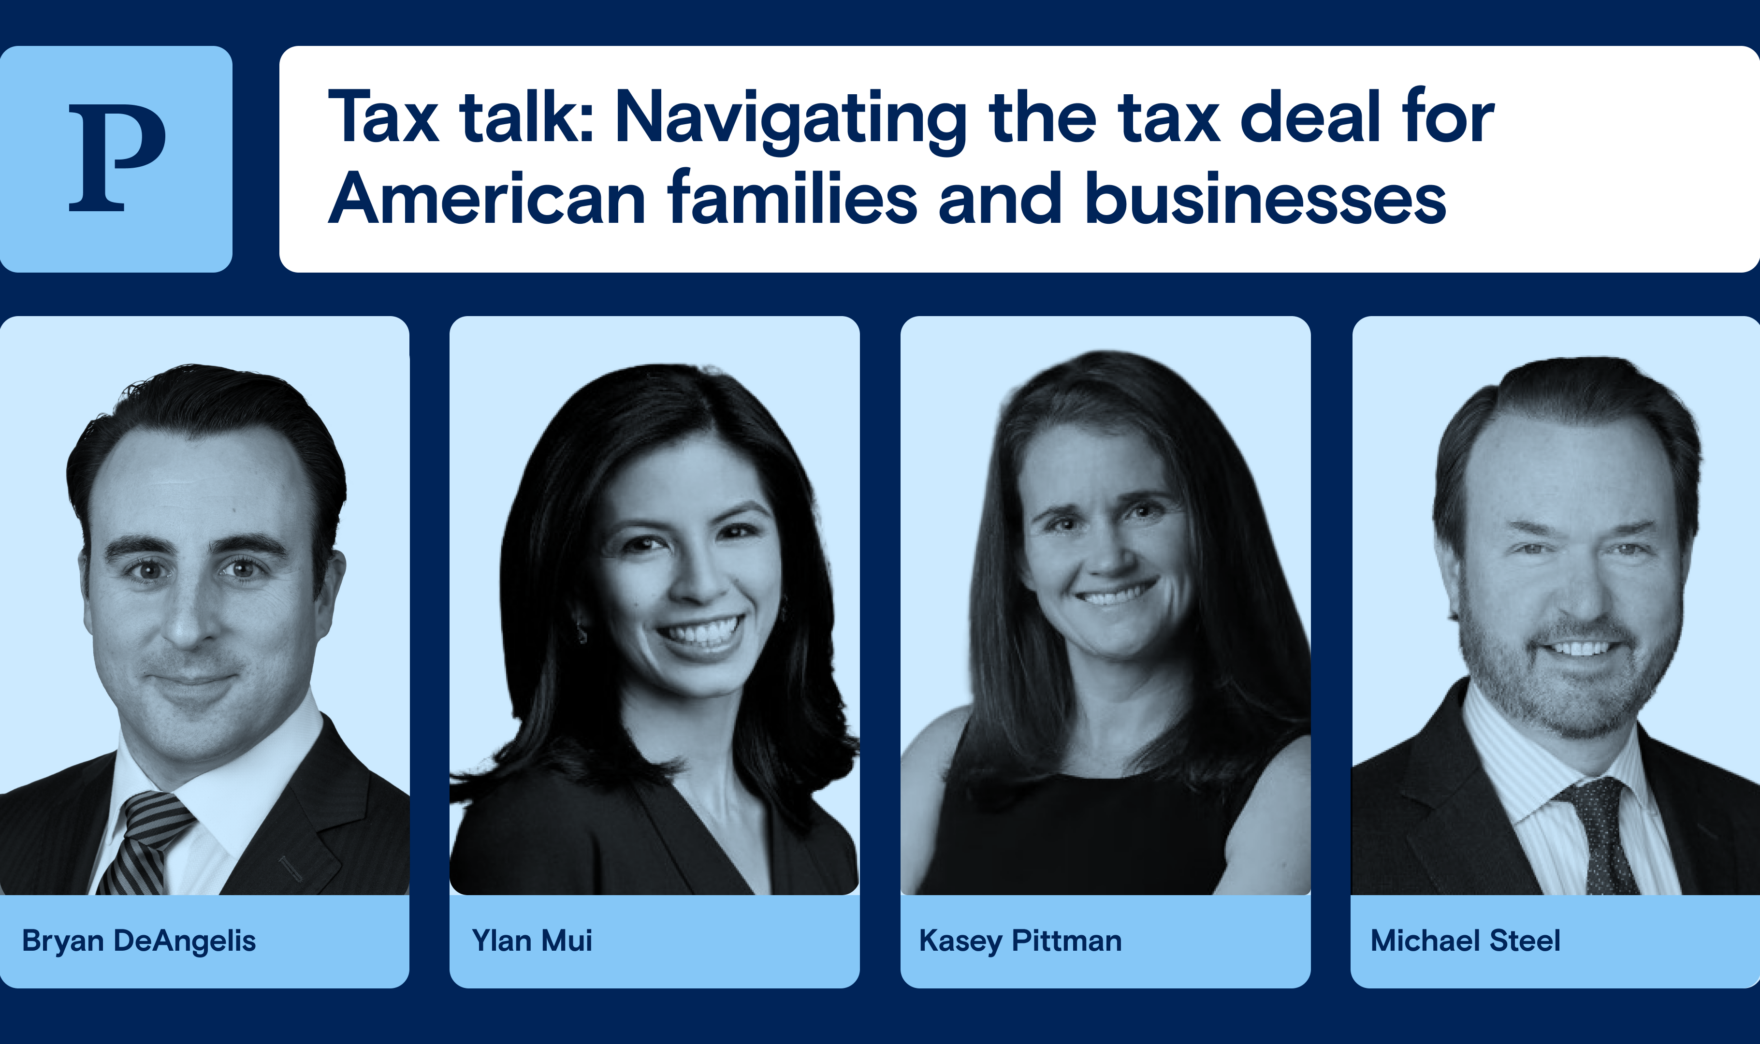 Tax talk: Navigating the tax deal for American families and businesses